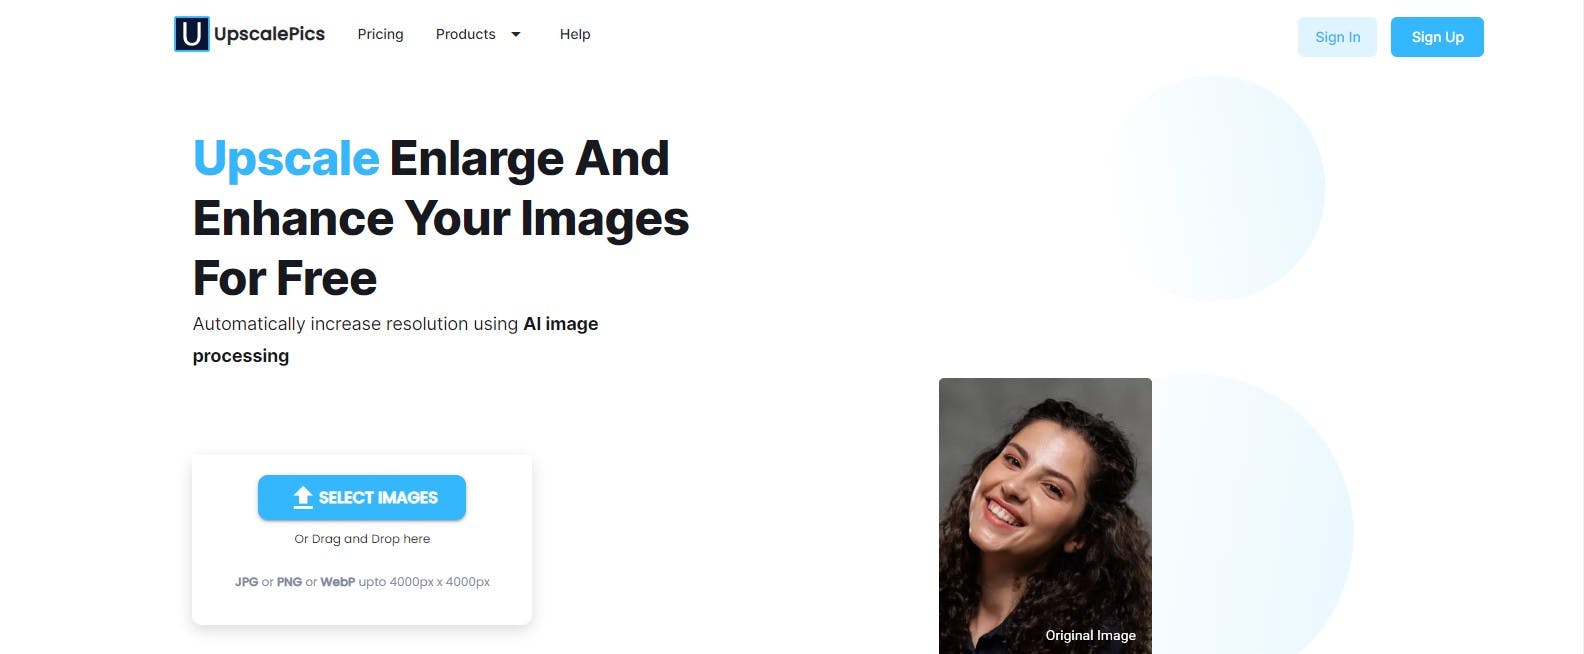 Upscale and enhaance your images for free